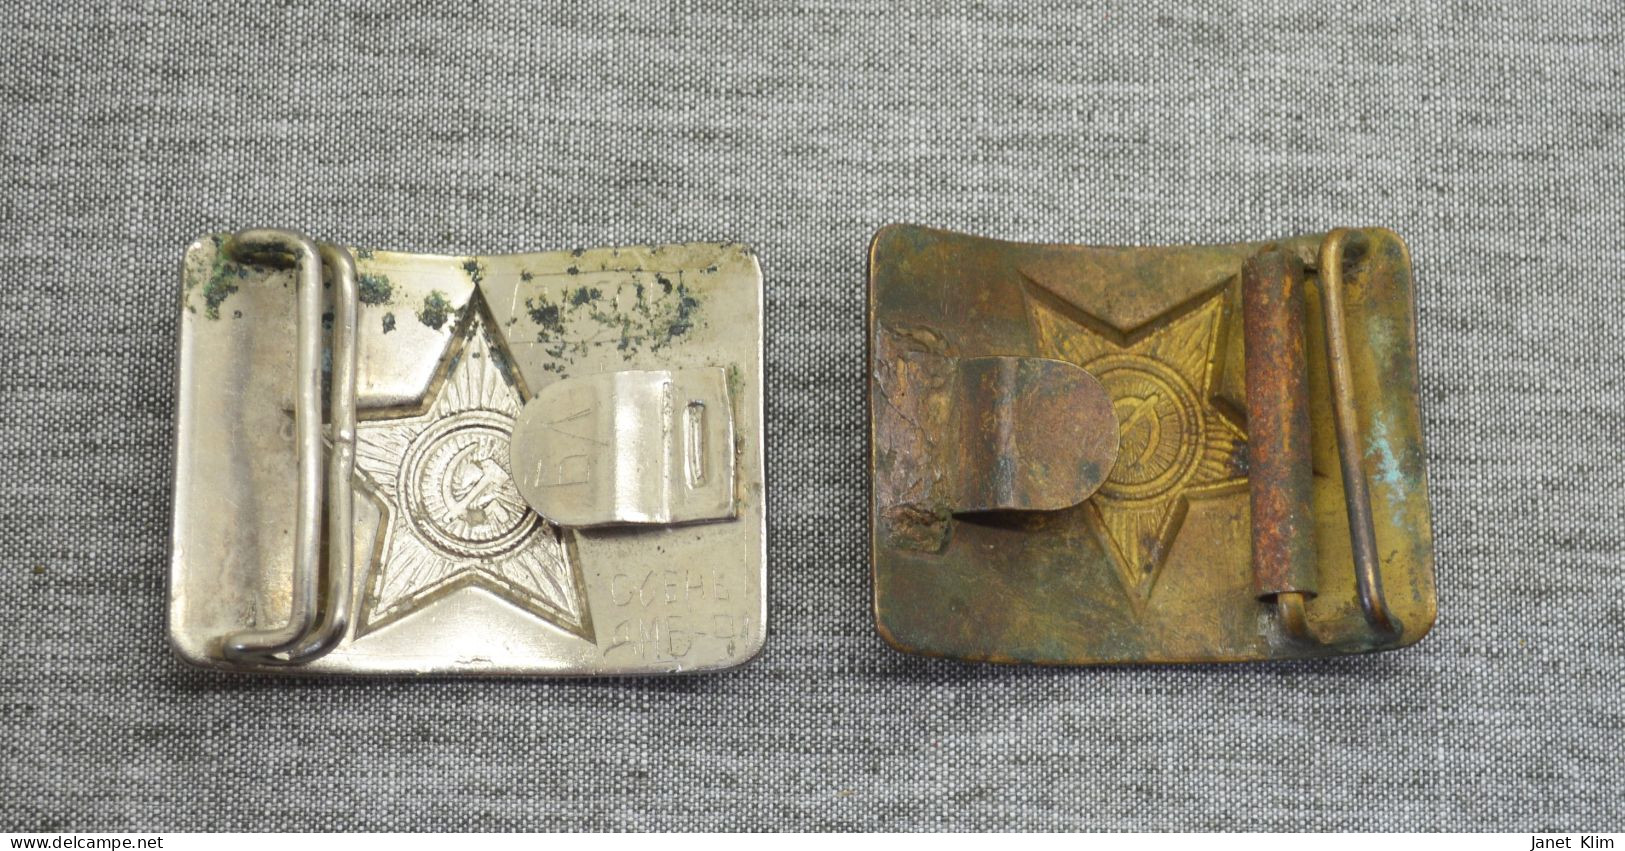 Vintage Two Buckles Of Soldiers Of The Ussr Army. One Personalized With A Signature - Uniformes